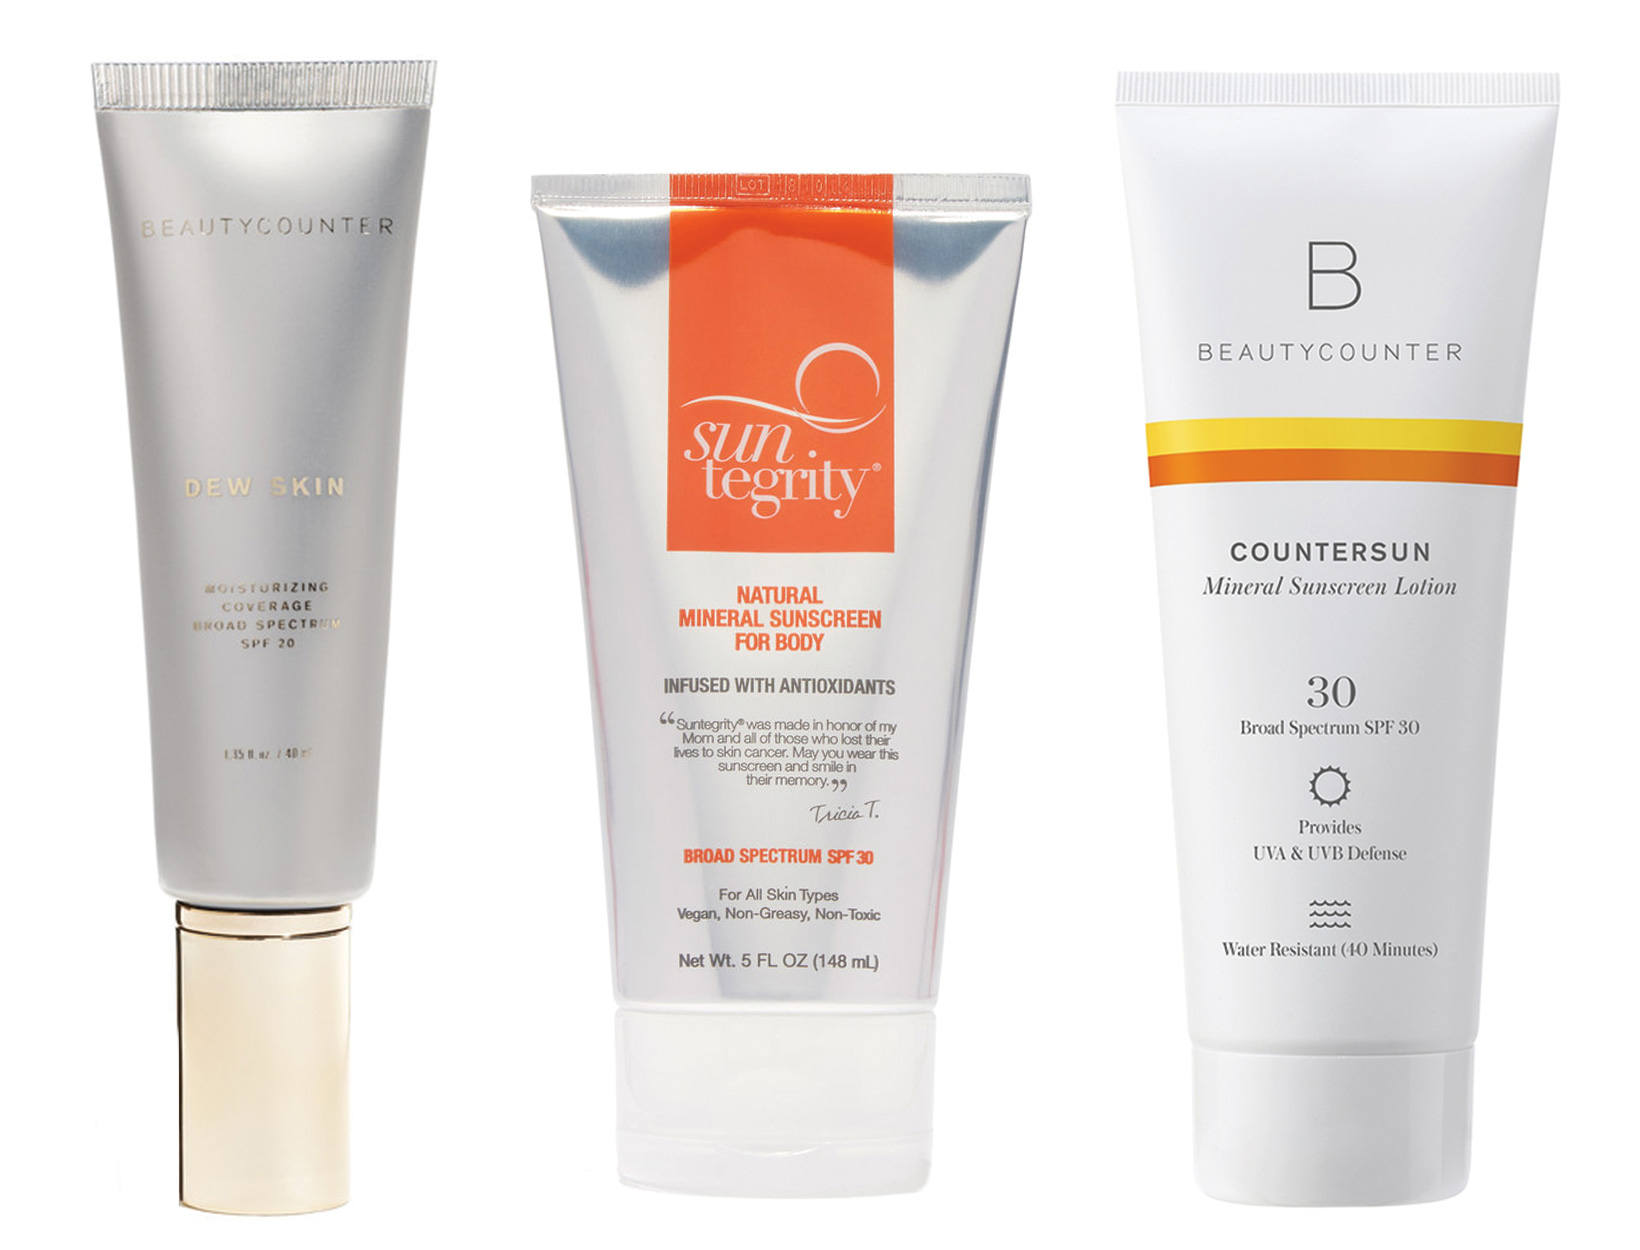 Sunscreen For Face Best - 6 Best Sunscreens For Sensitive Skin According To Our Dermatologists 